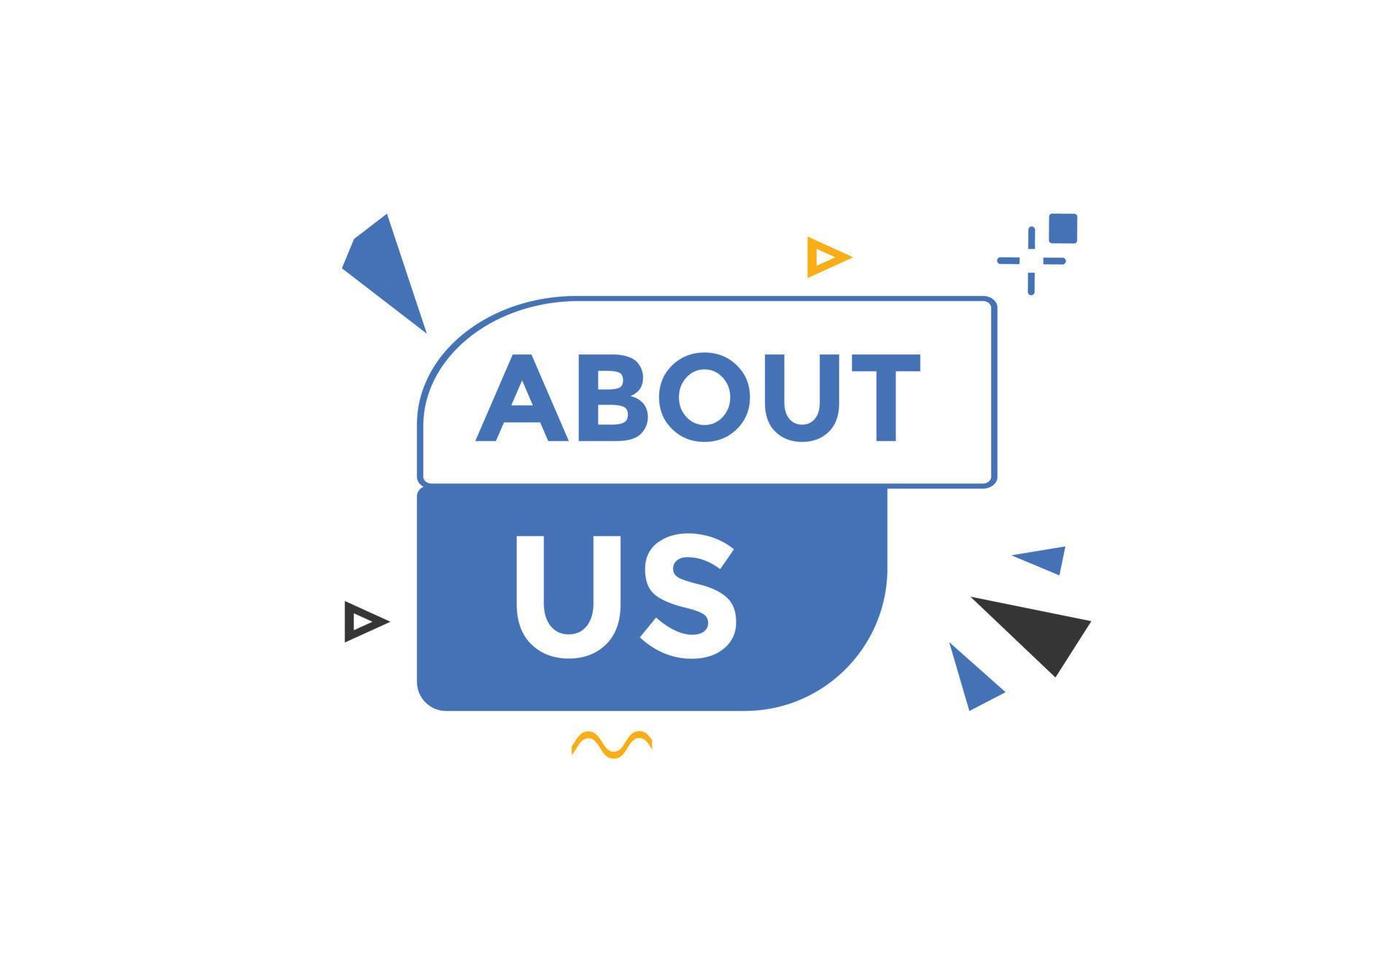 About us text web button template. About us sign icon label colorful vector